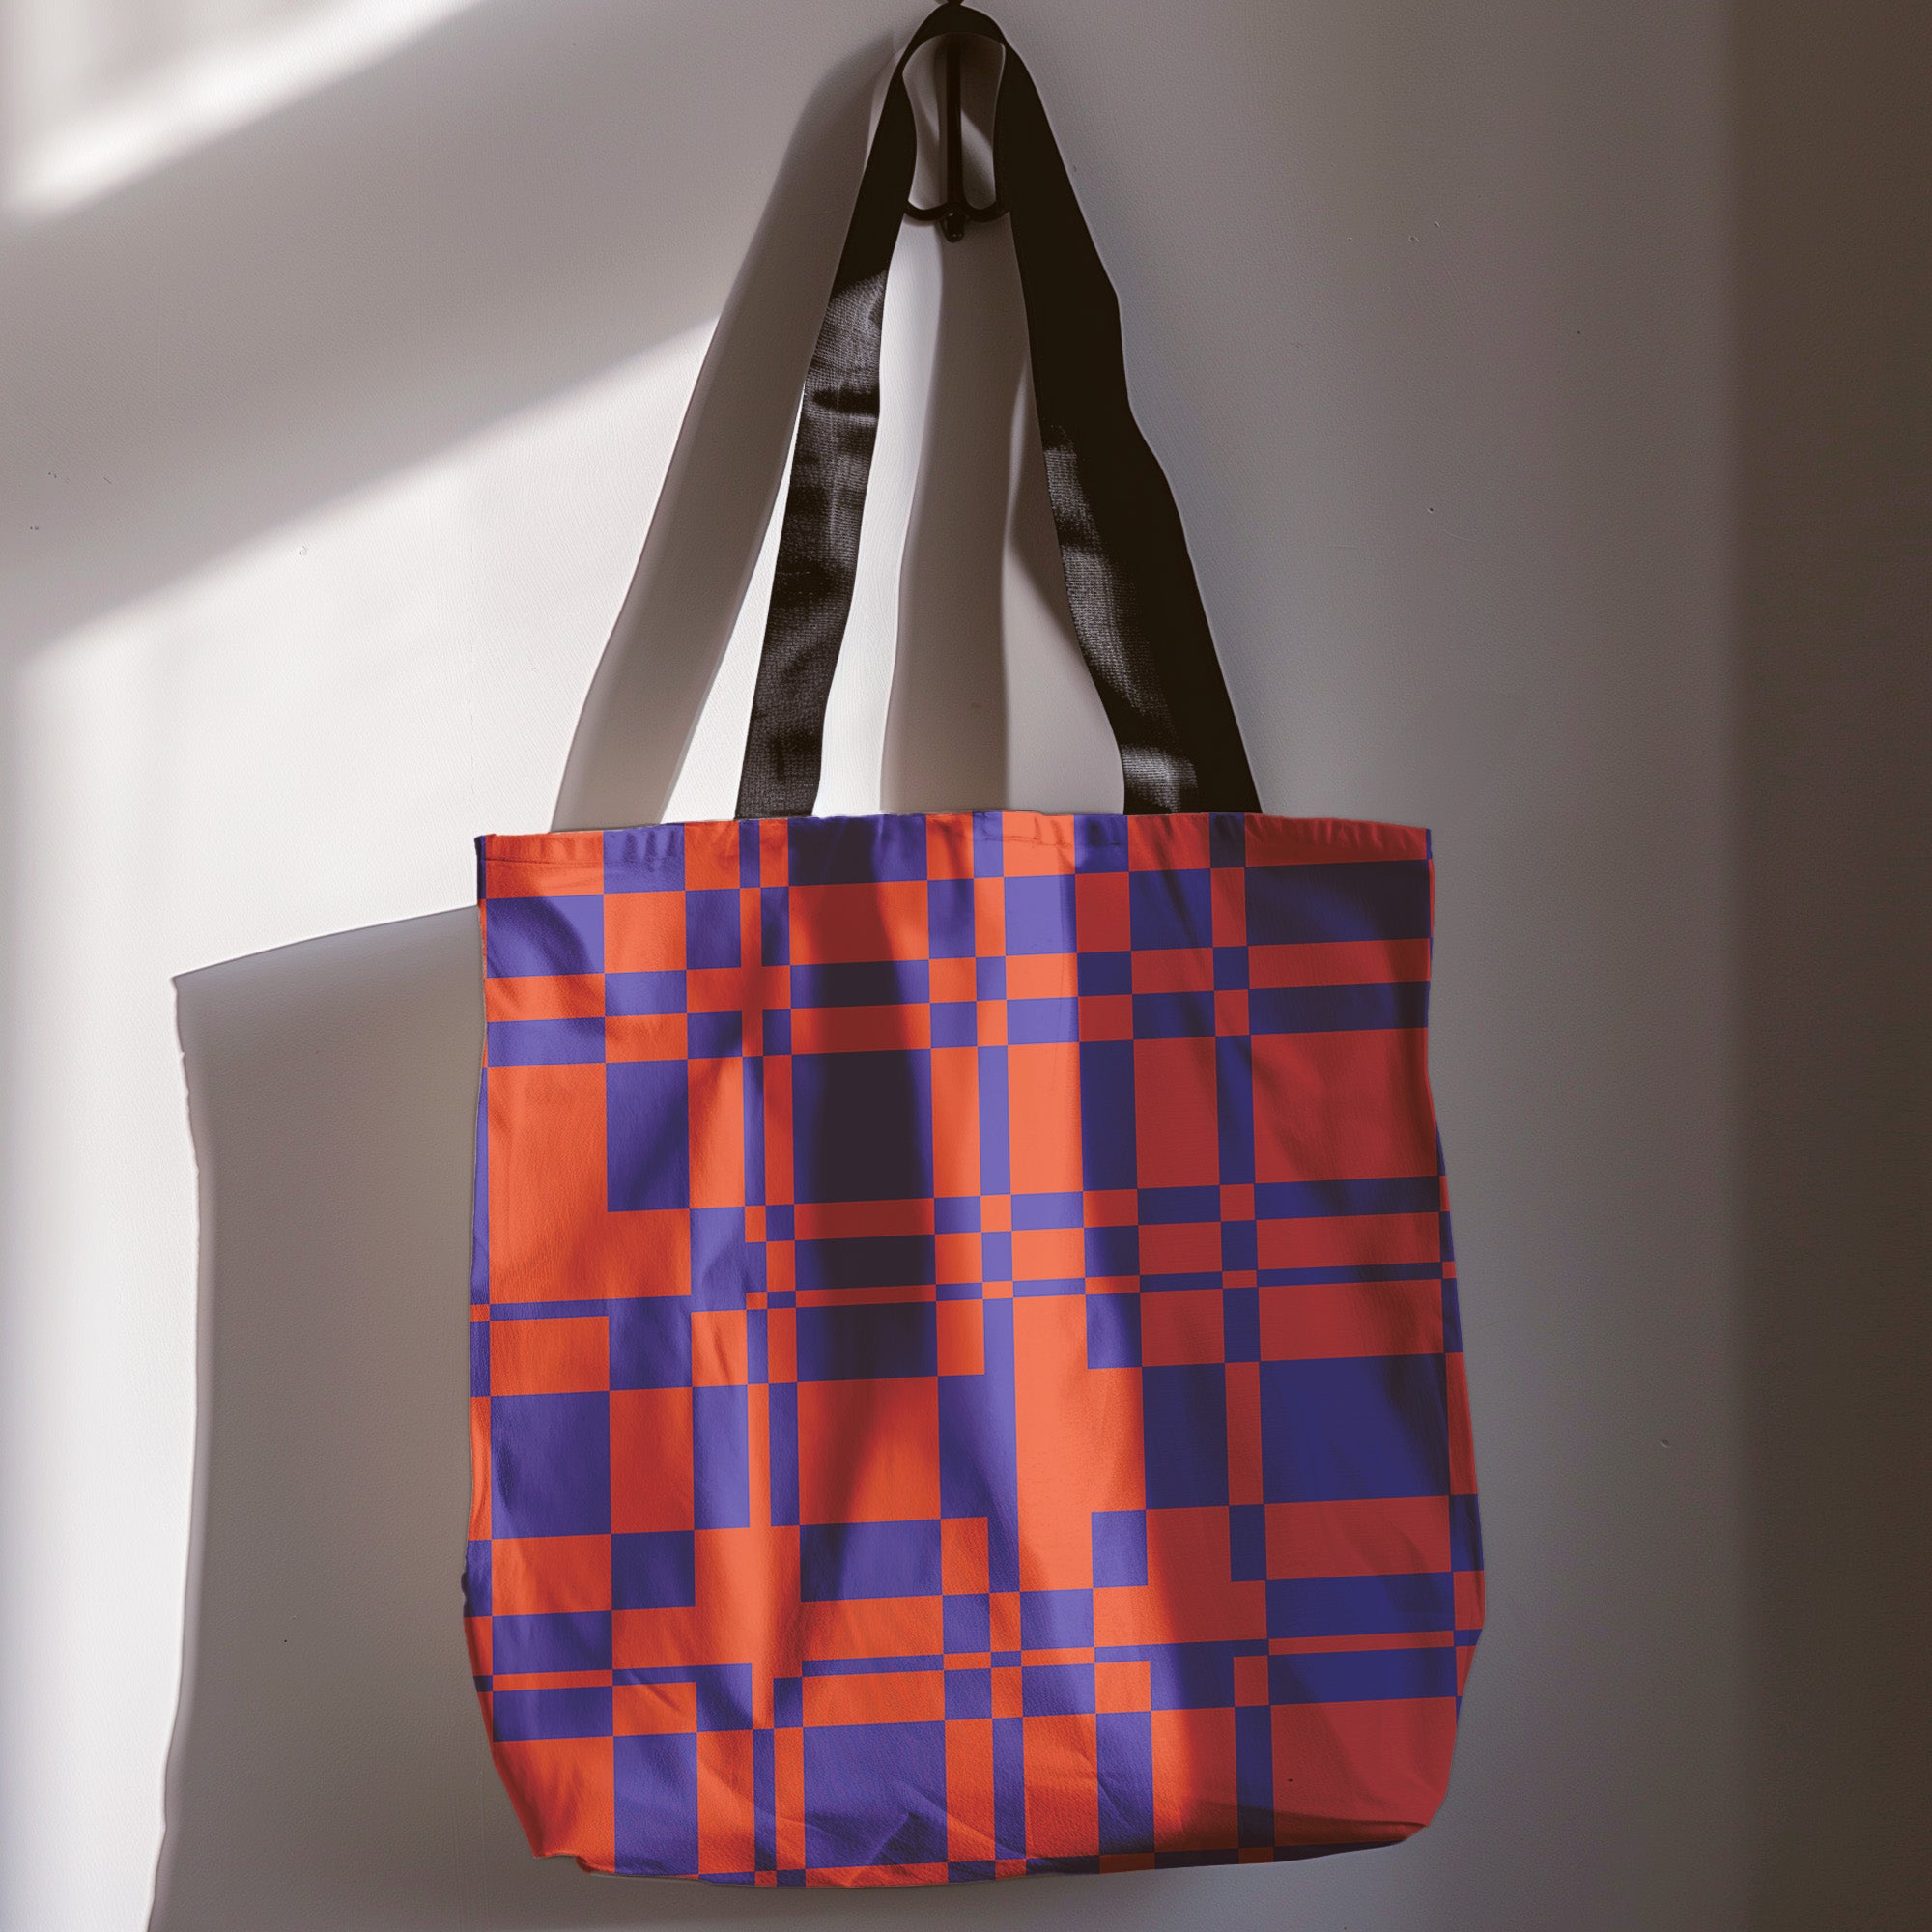 Squared Away Tote in Sunset Orange and Cobalt